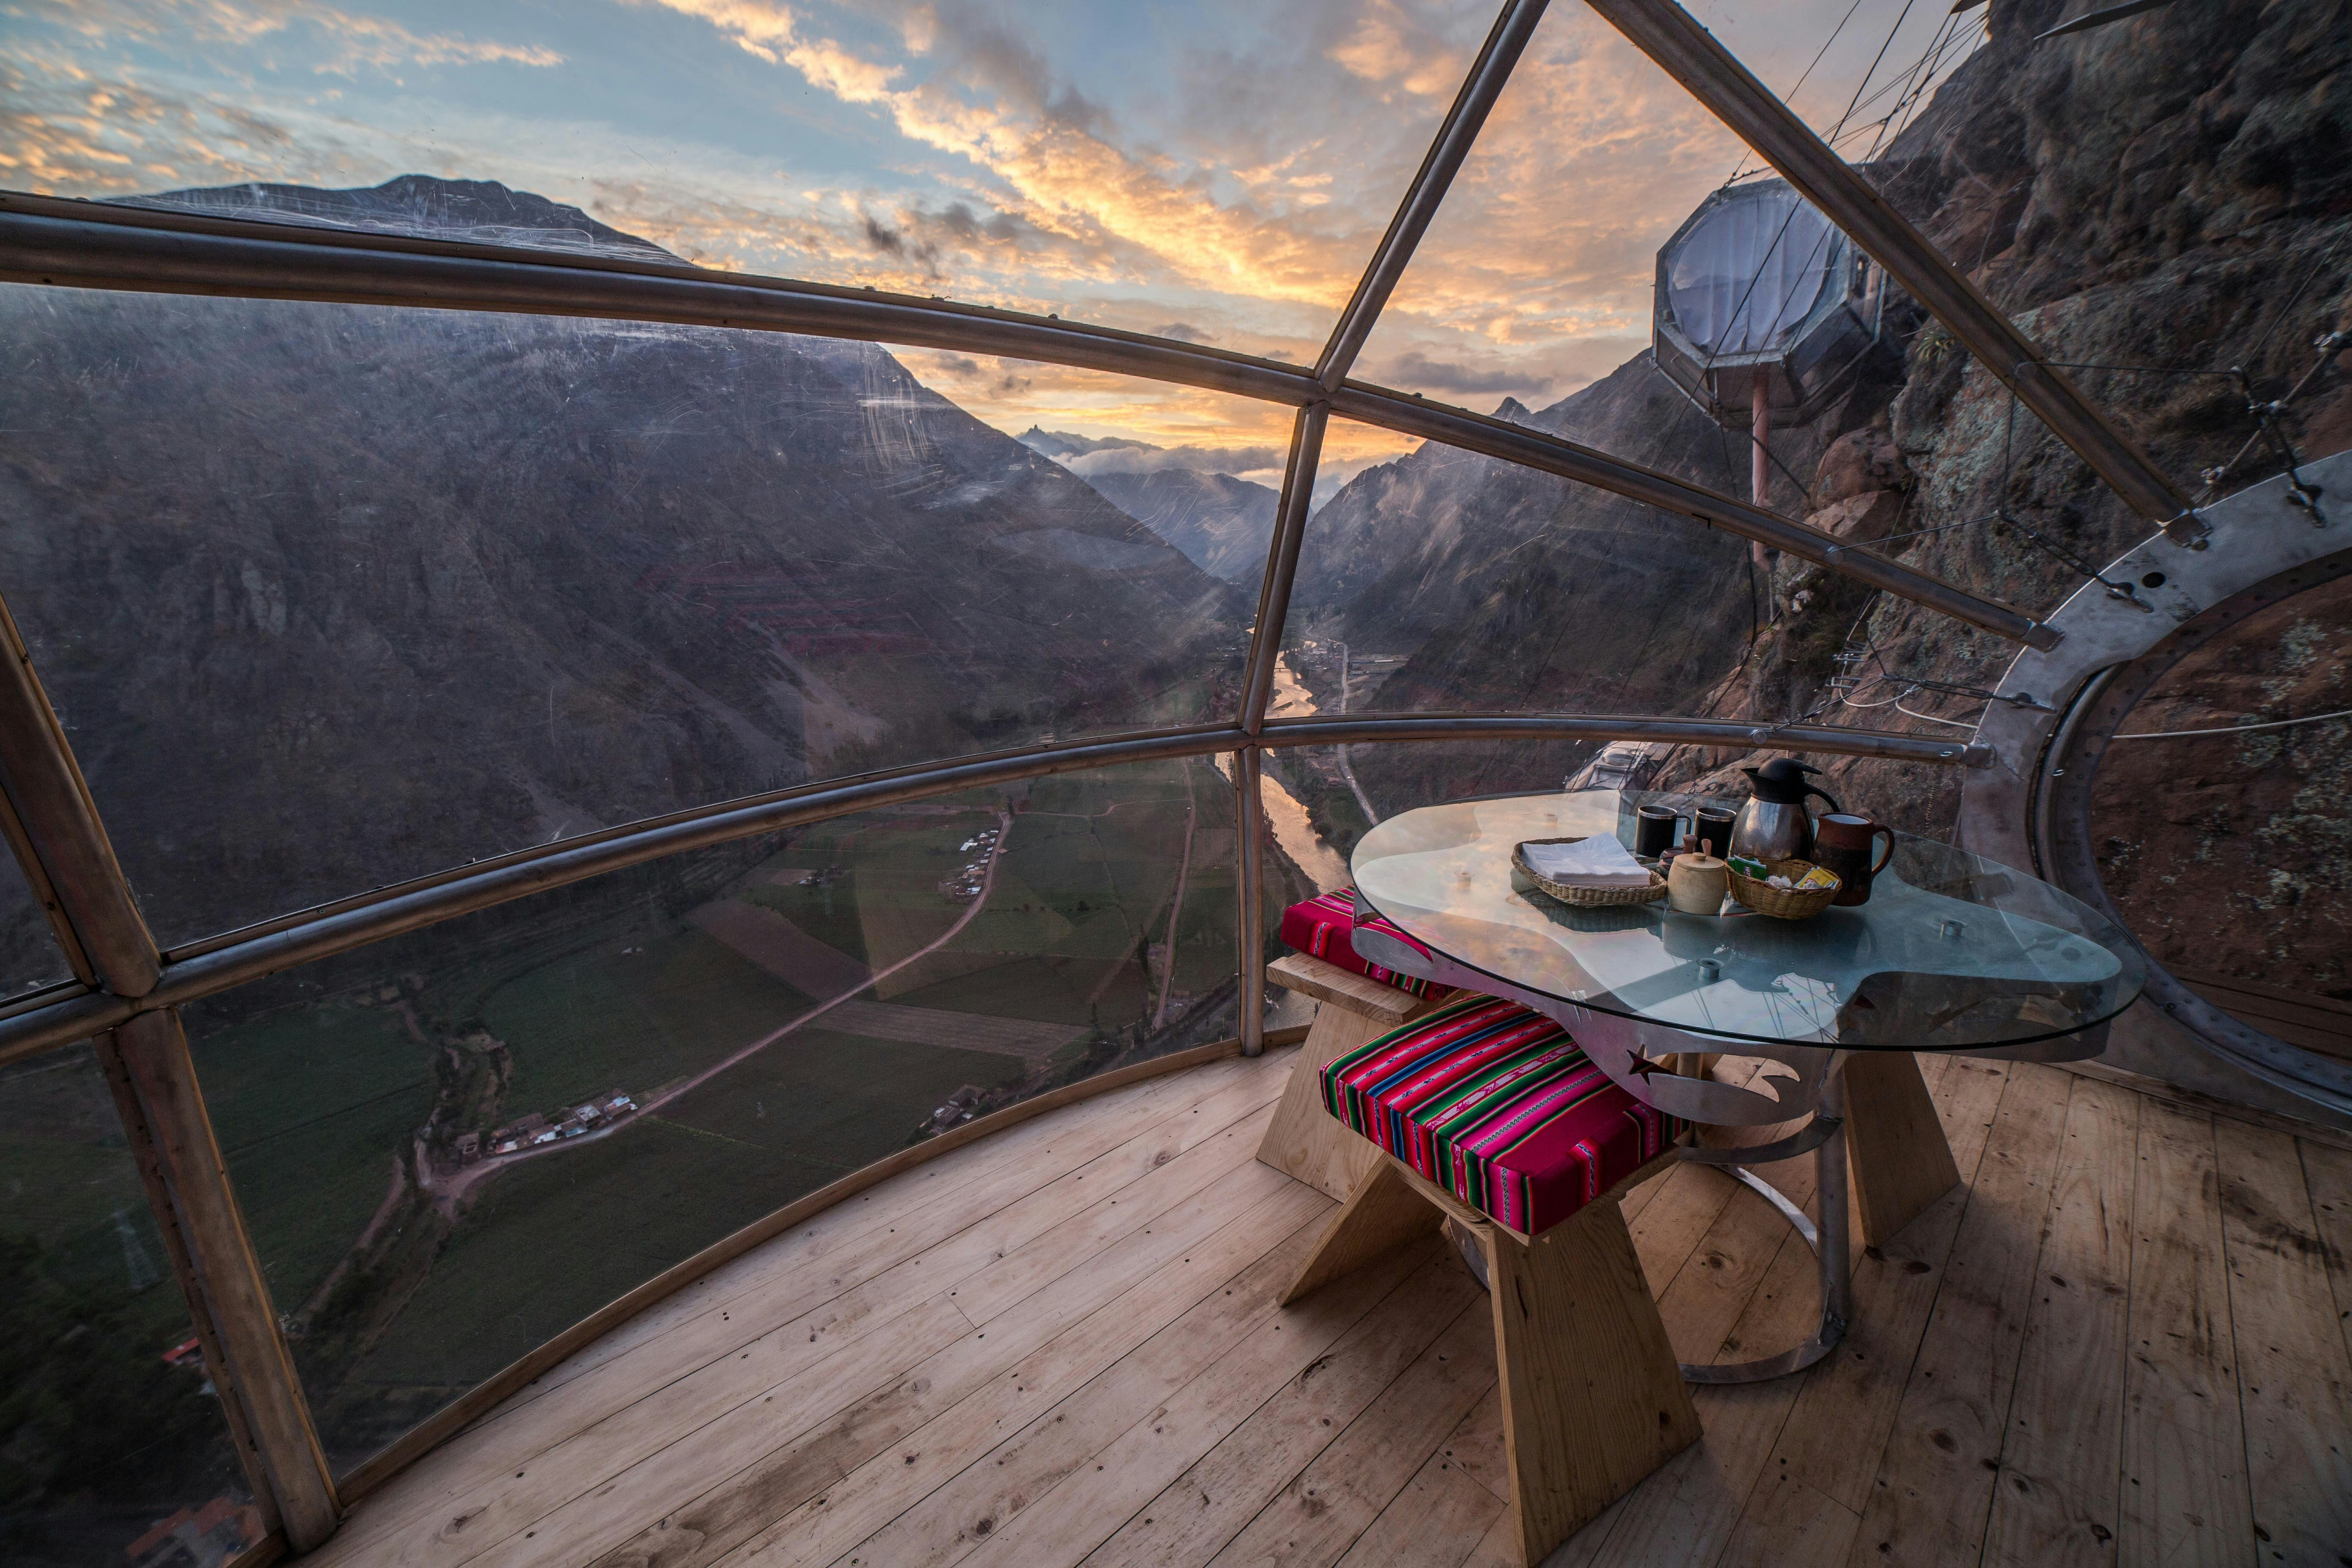 A table is set for coffee inside a glass structure with wooden floorboards on the floor. Through the glass we can see the structure is affixed to a cliff-face, and there's a view way down to the valley below and the huge mountains surrounding it.